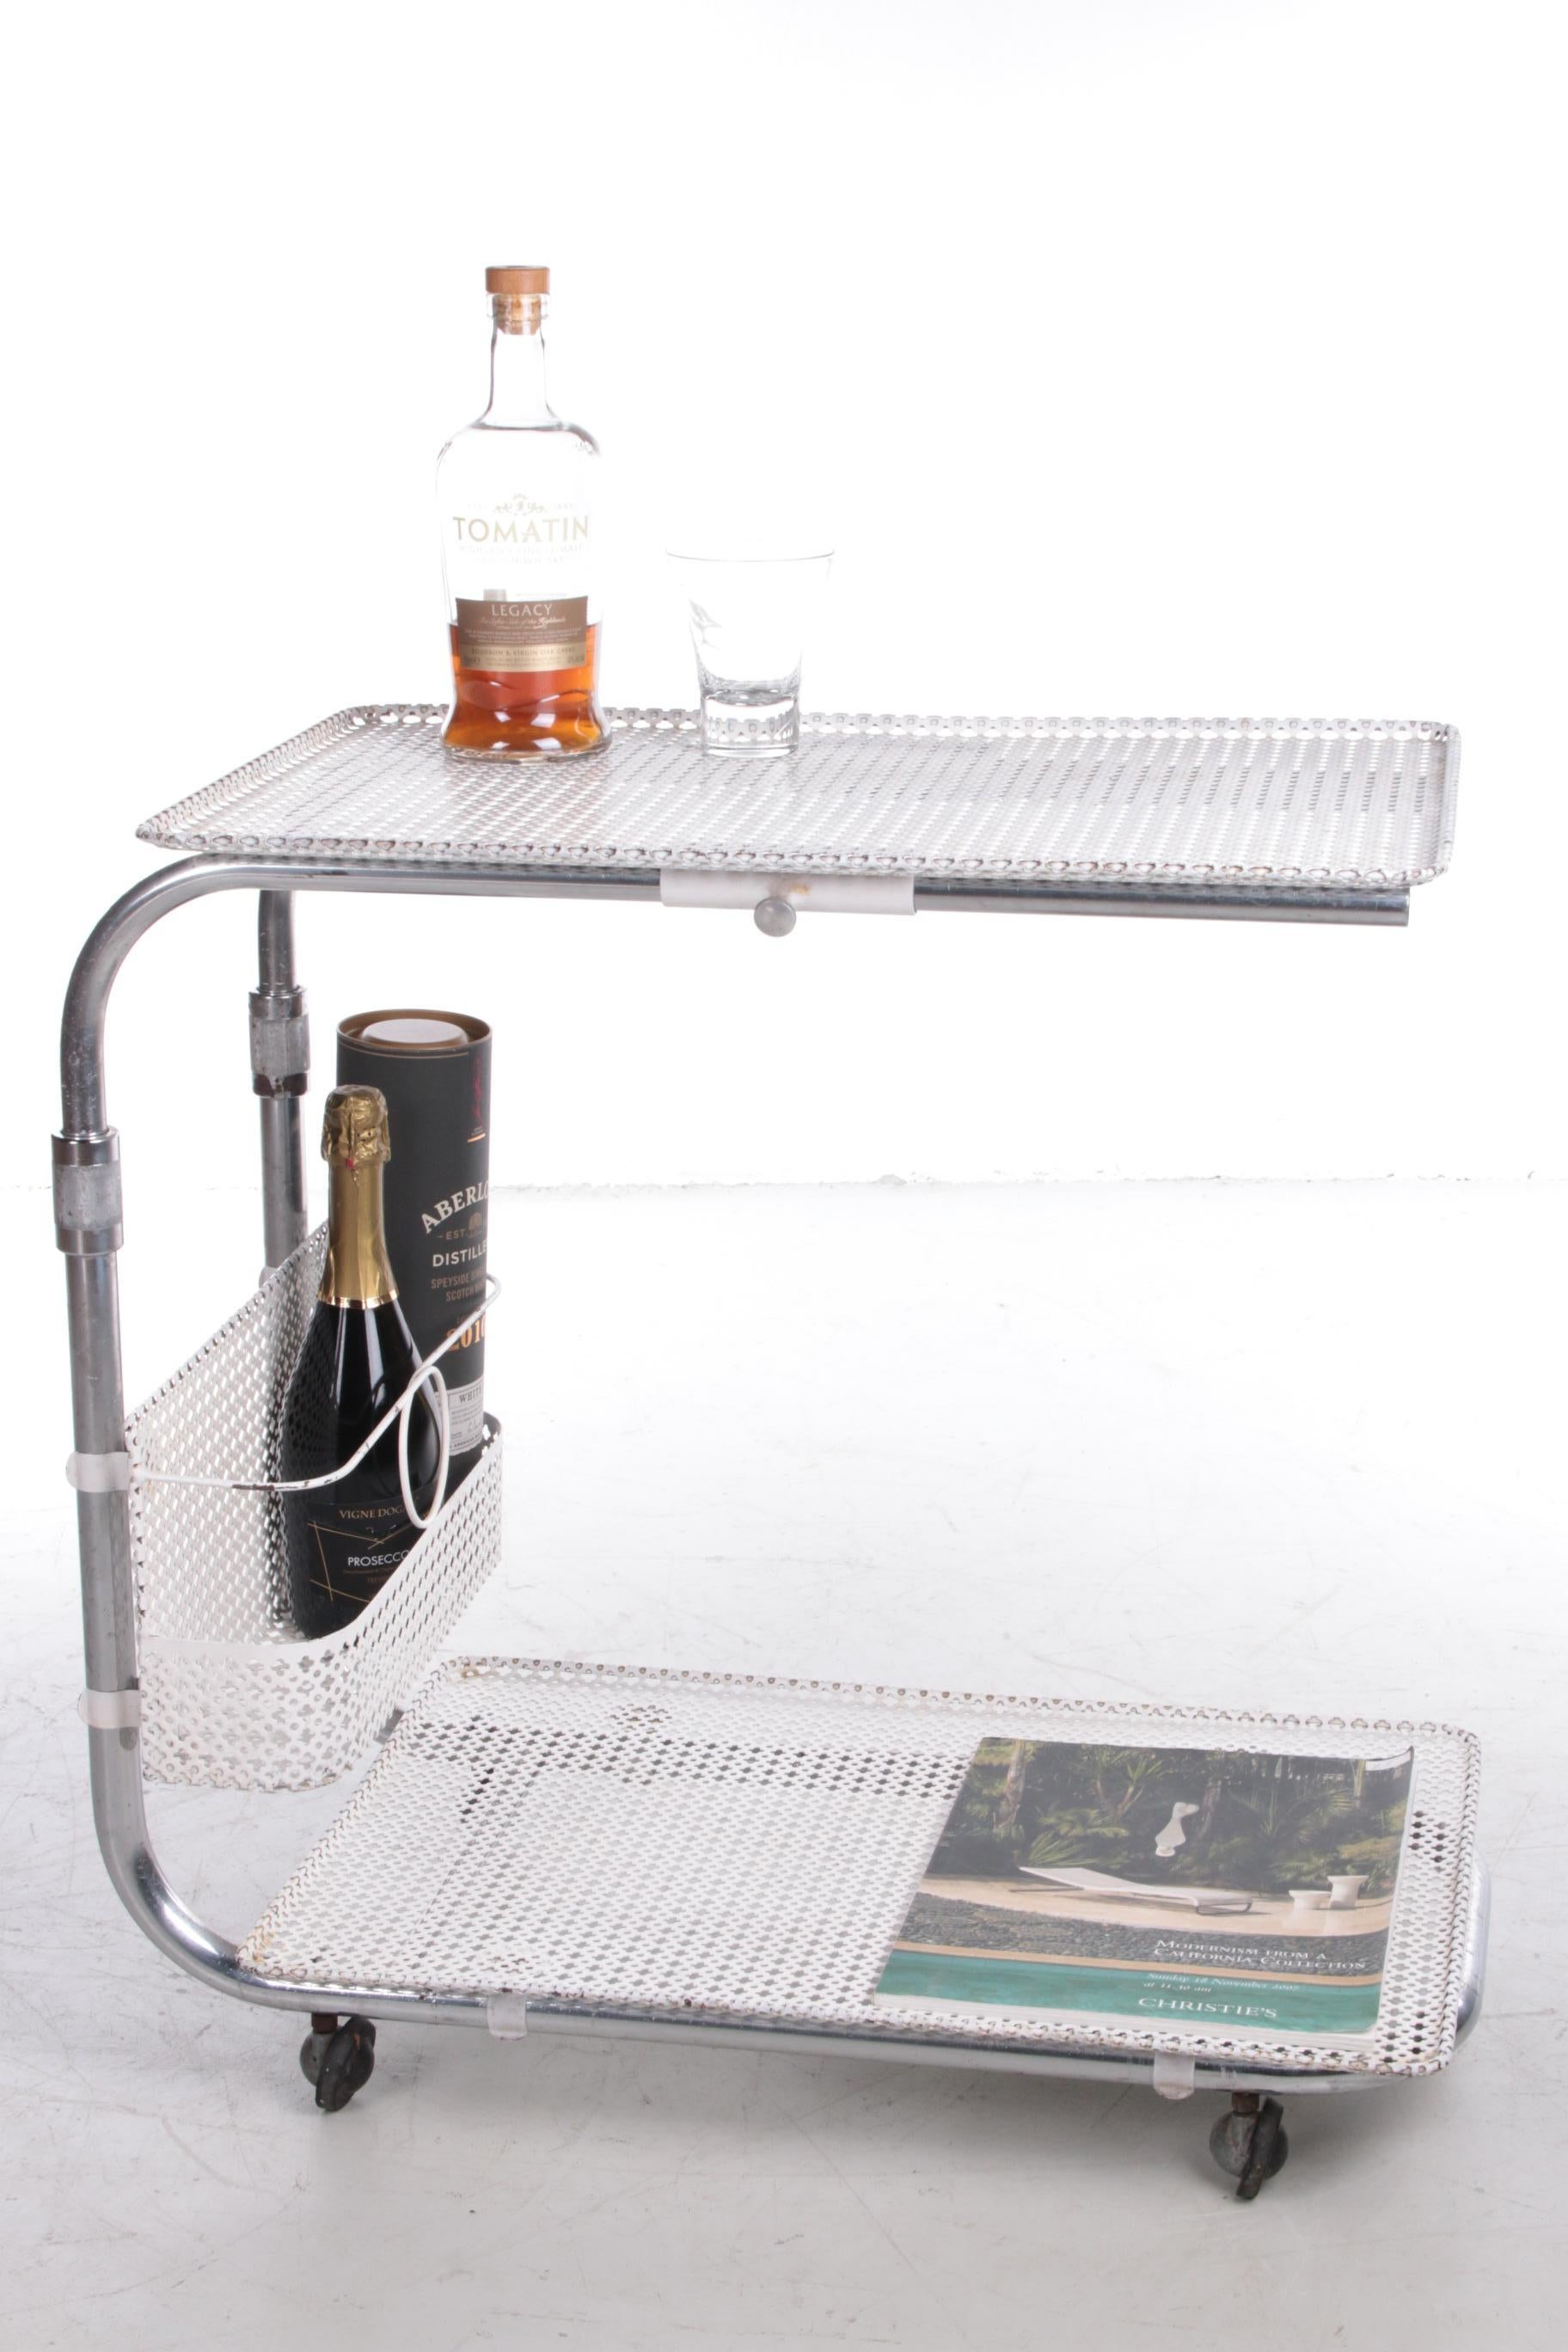 Vintage metal trolley by Mathieu Mategot, 1960s.


Very classic and very nice bar serving. Trays and bottle holders made of ivory-coloured perforated sheet steel. Chromed tubular structure on wheels. Height adjustable structure. Minor signs of